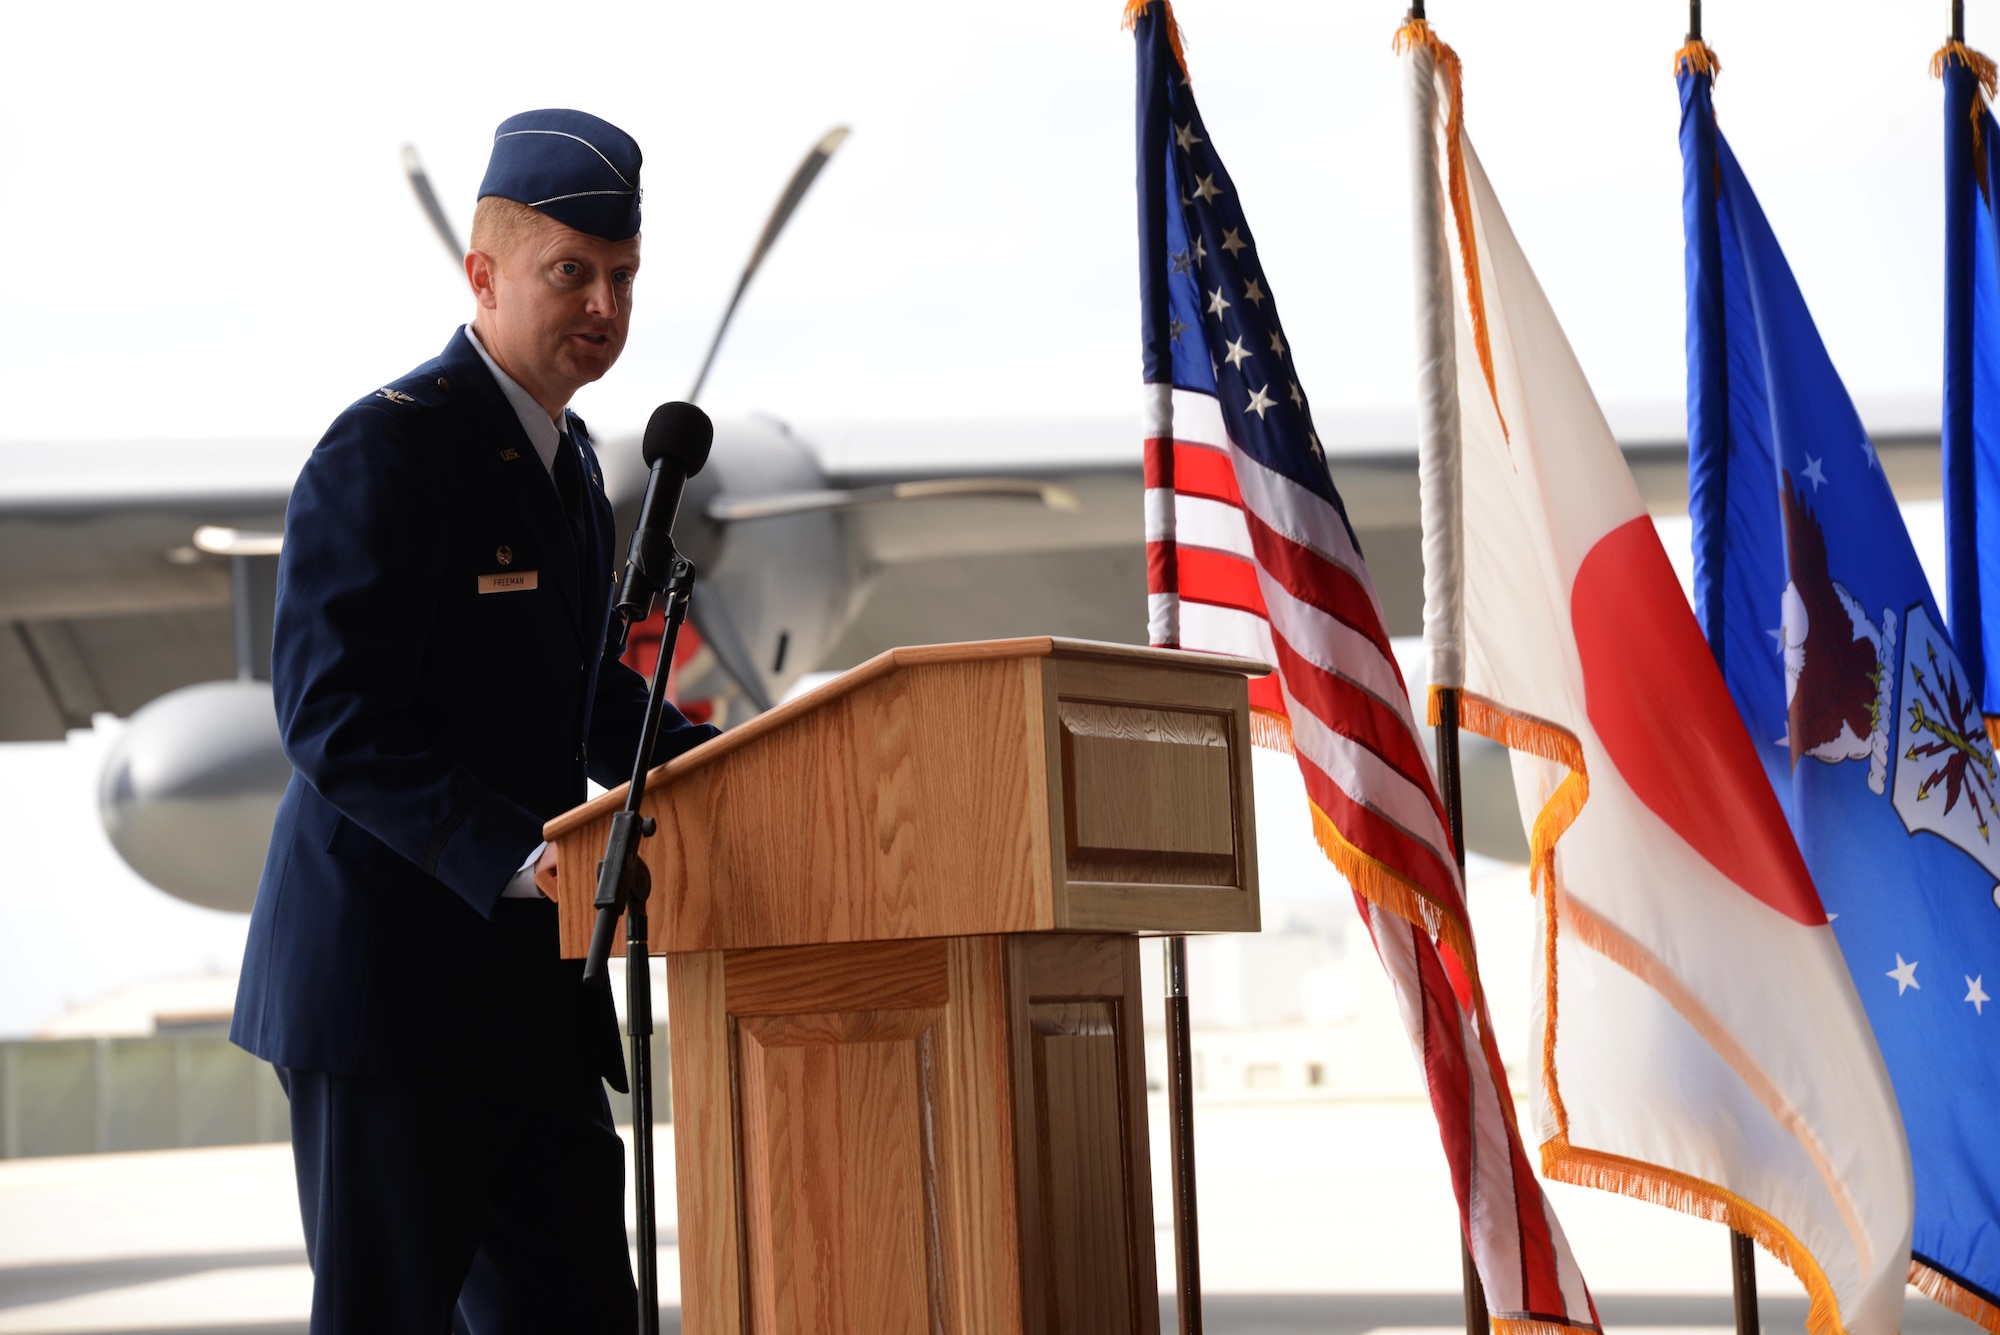 Col.  William C. Freeman, 353rd Special Operations Group commander, addressed the group, during an Assumption of Command ceremony held May 8, 2015 on Kadena Air Base, Japan.  The 353rd Special Operations Group is the only Air Force Special Operations unit in PACOM.  (U.S. Air Force photo by Tech. Sgt. Kristine Dreyer)